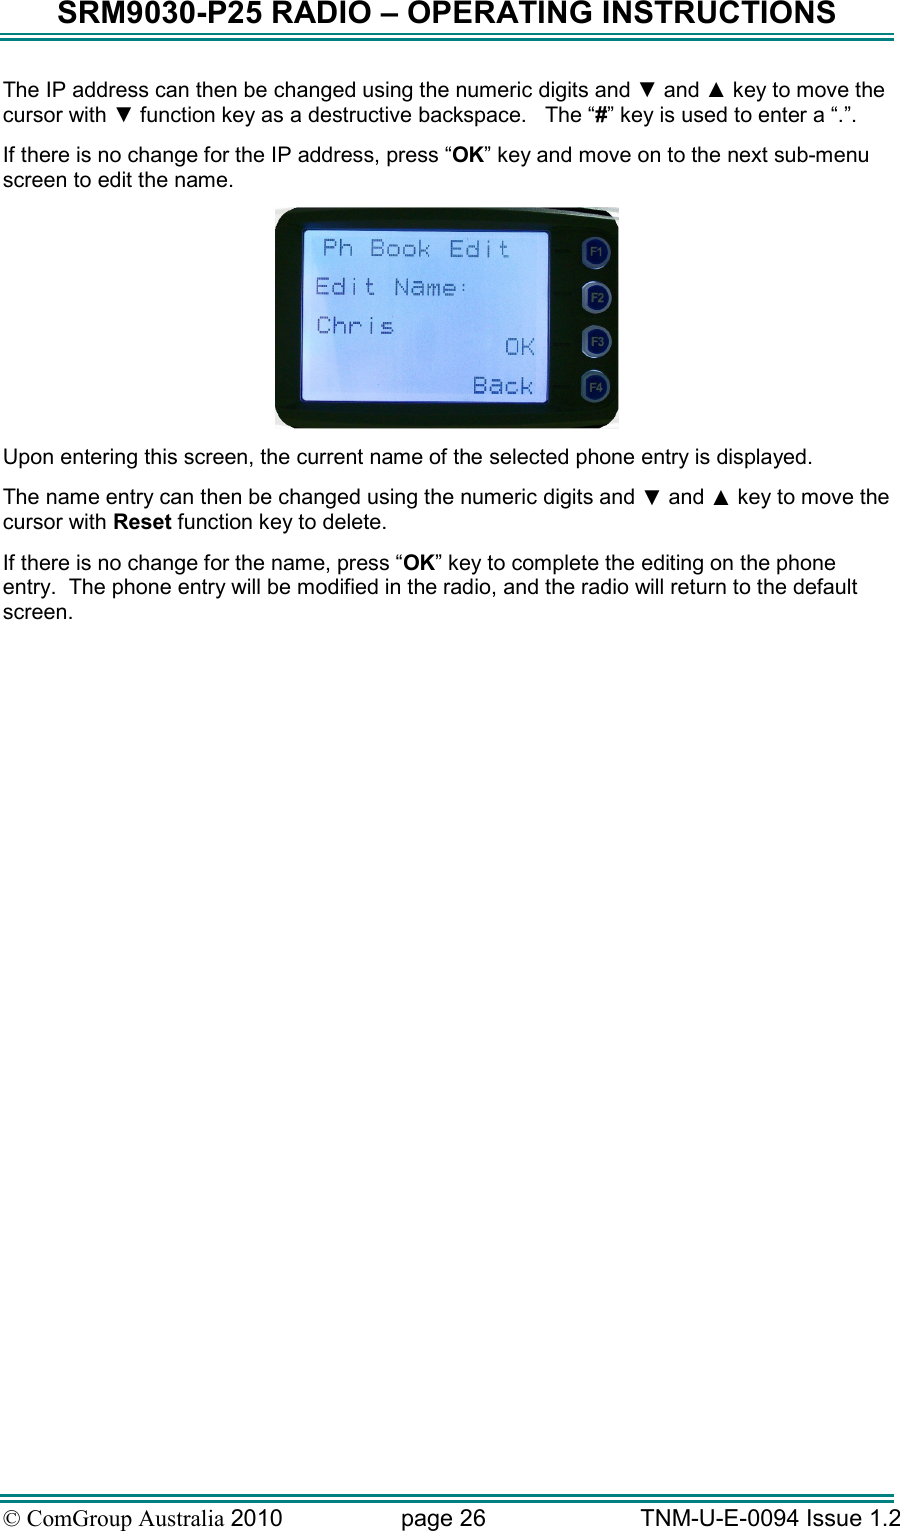 SRM9030-P25 RADIO – OPERATING INSTRUCTIONS © ComGroup Australia 2010  page 26   TNM-U-E-0094 Issue 1.2 The IP address can then be changed using the numeric digits and ▼ and ▲ key to move the cursor with ▼ function key as a destructive backspace.   The “#” key is used to enter a “.”. If there is no change for the IP address, press “OK” key and move on to the next sub-menu screen to edit the name.  Upon entering this screen, the current name of the selected phone entry is displayed.   The name entry can then be changed using the numeric digits and ▼ and ▲ key to move the cursor with Reset function key to delete.   If there is no change for the name, press “OK” key to complete the editing on the phone entry.  The phone entry will be modified in the radio, and the radio will return to the default screen.  